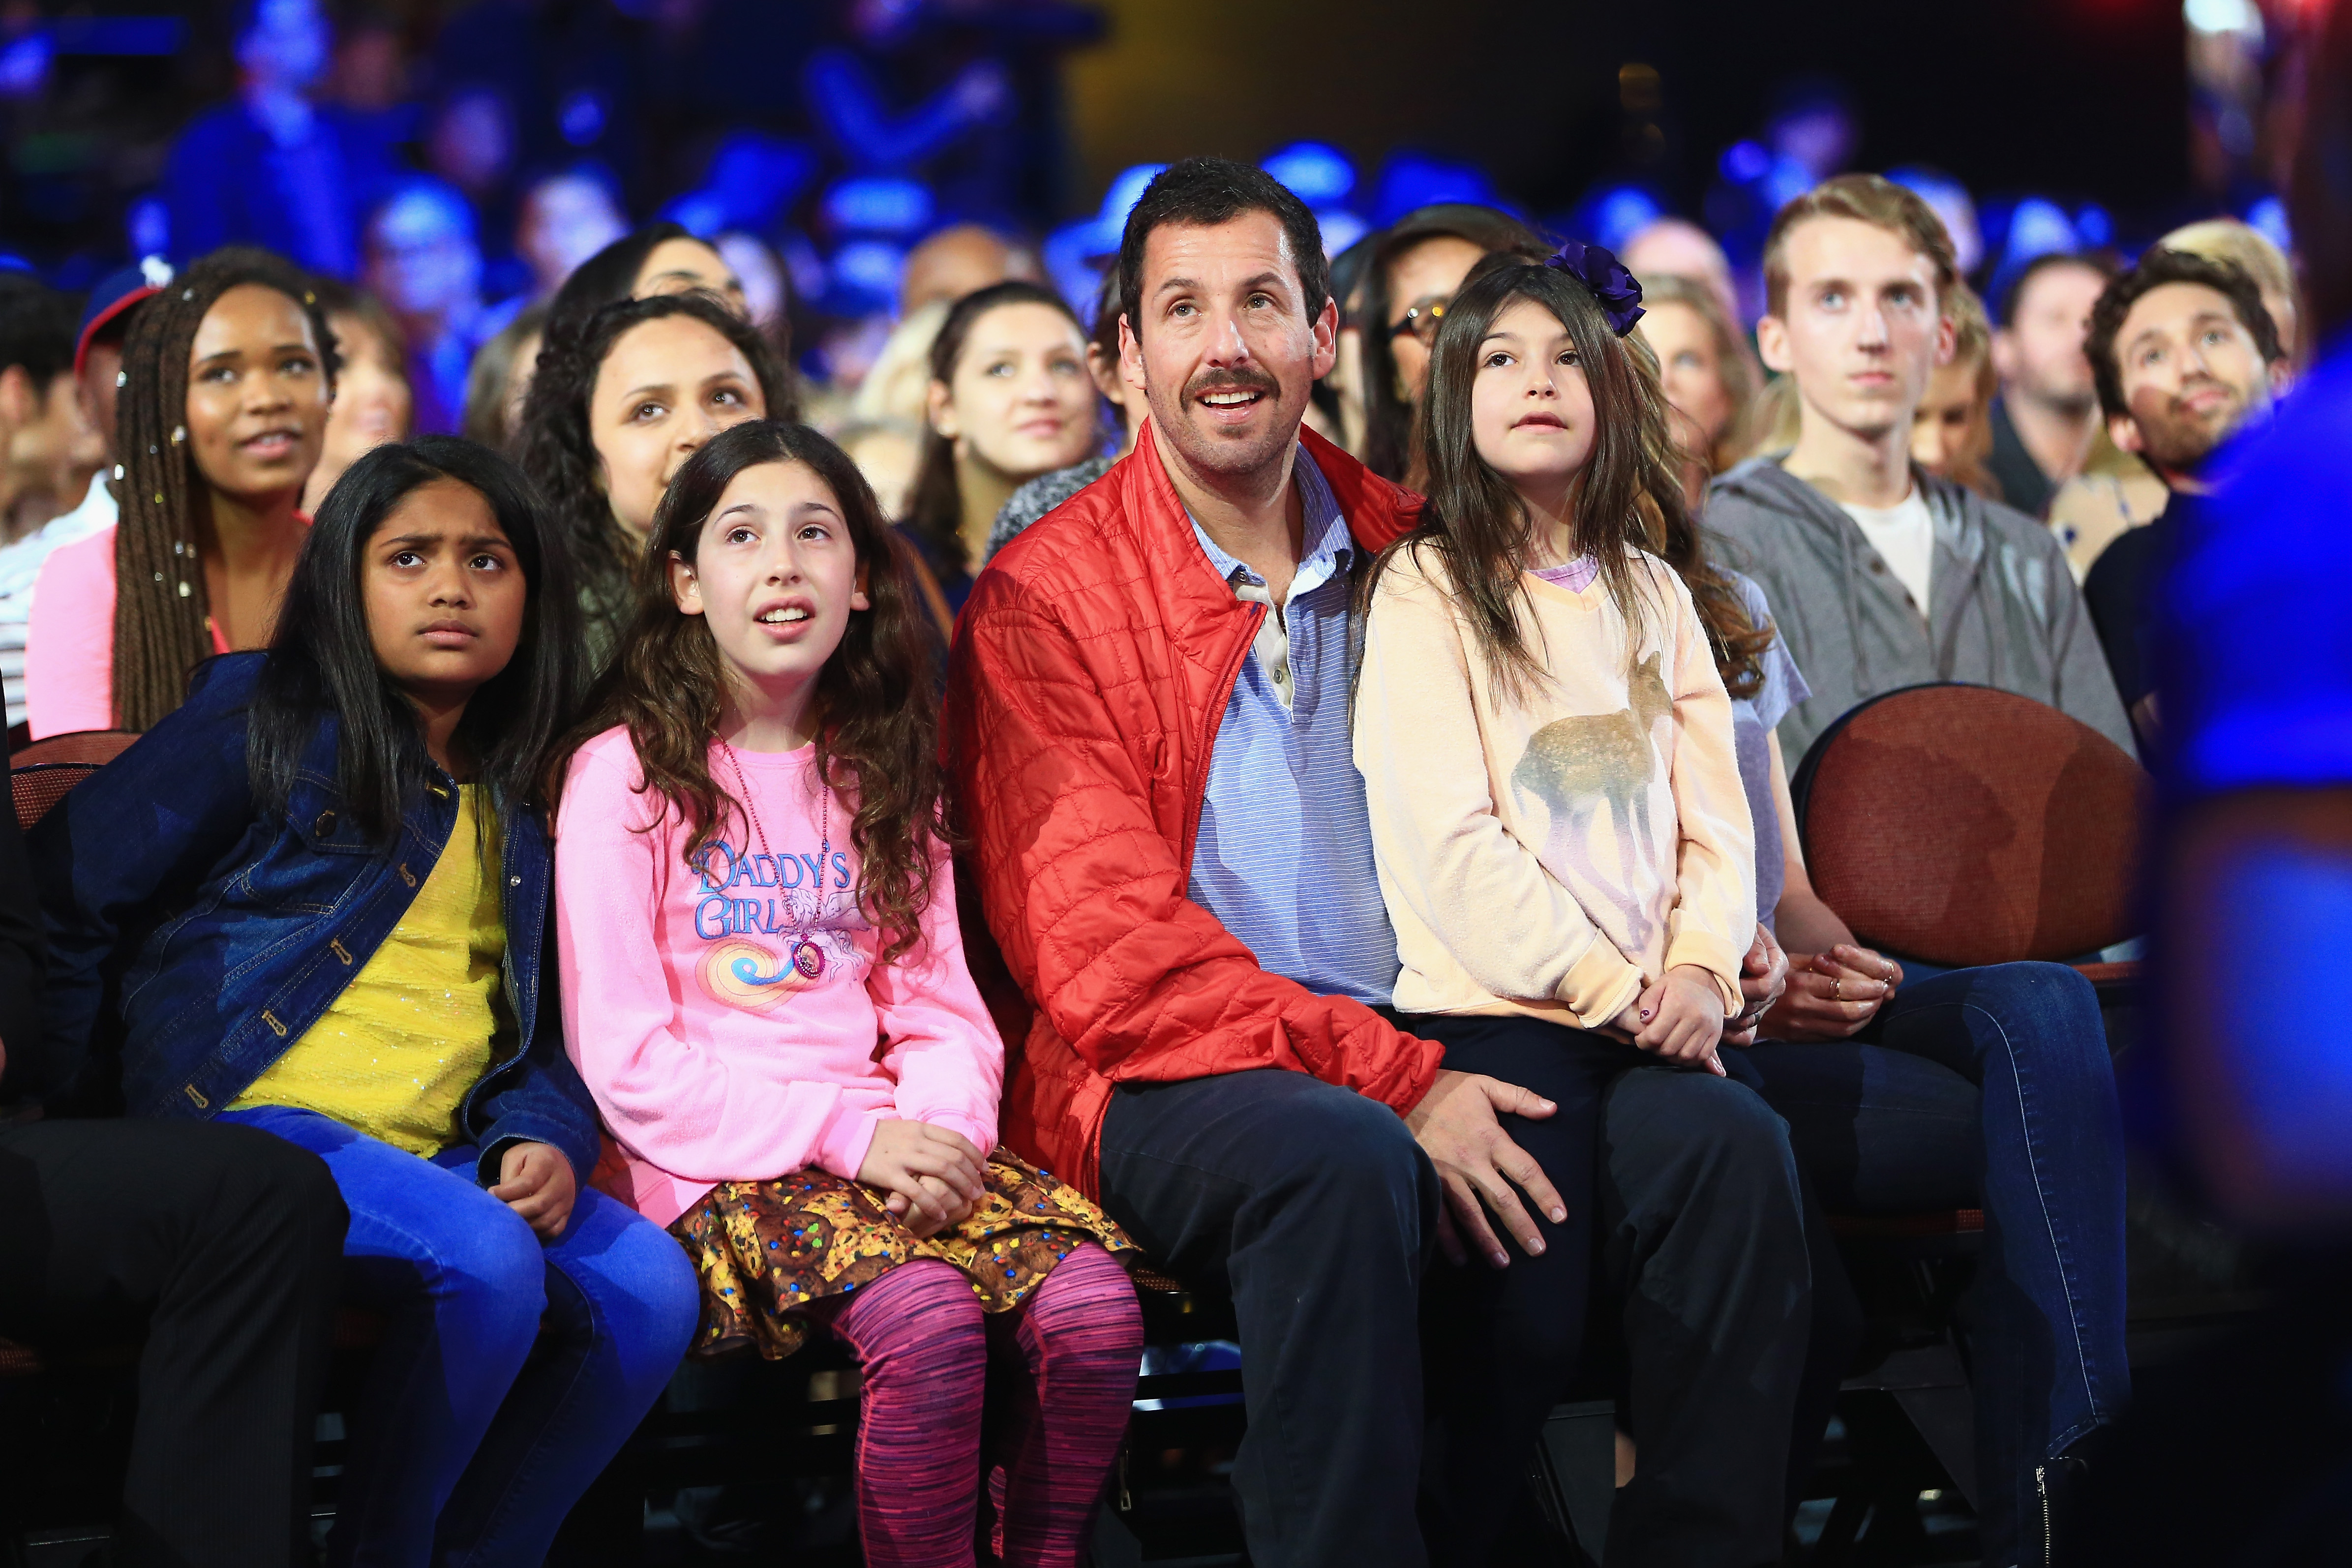 (L-R) Sadie Madison Sandler, actor Adam Sandler and Sunny Madeline Sandler attend Nickelodeon's 2016 Kids' Choice Awards at The Forum, on March 12, 2016 in Inglewood, California. | Source: Getty Images